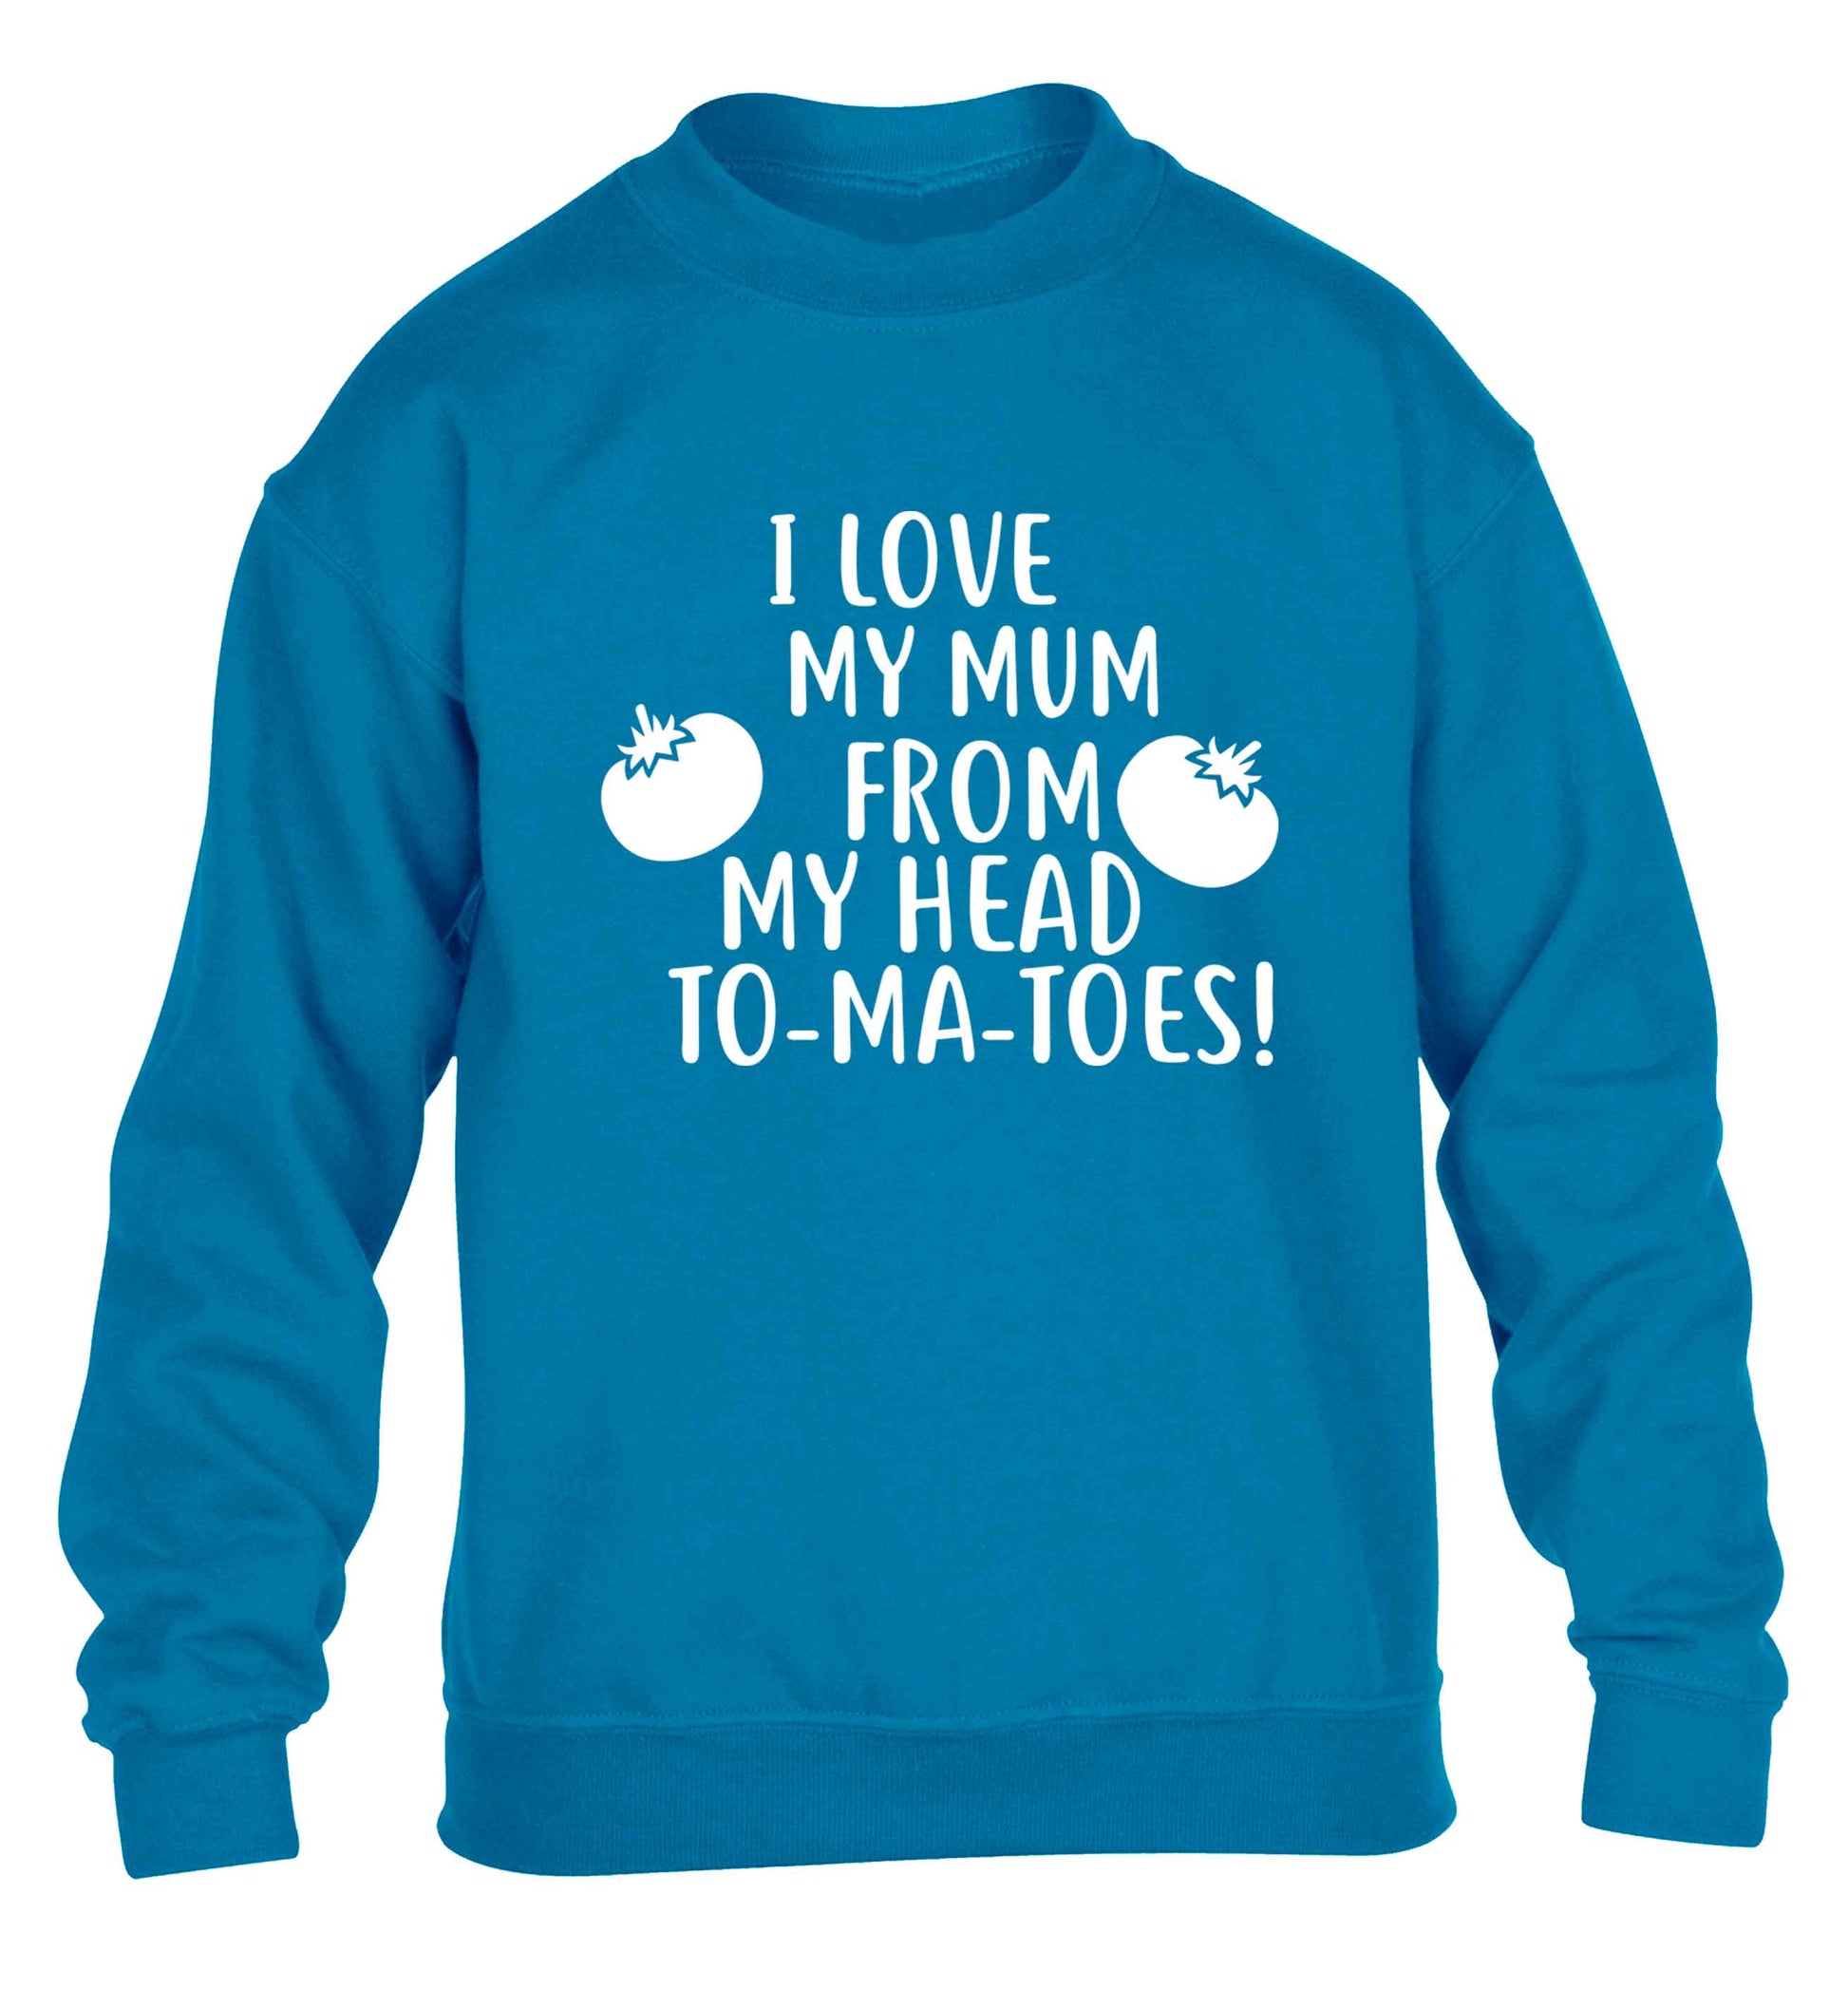 I love my mum from my head to-my-toes! children's blue sweater 12-13 Years